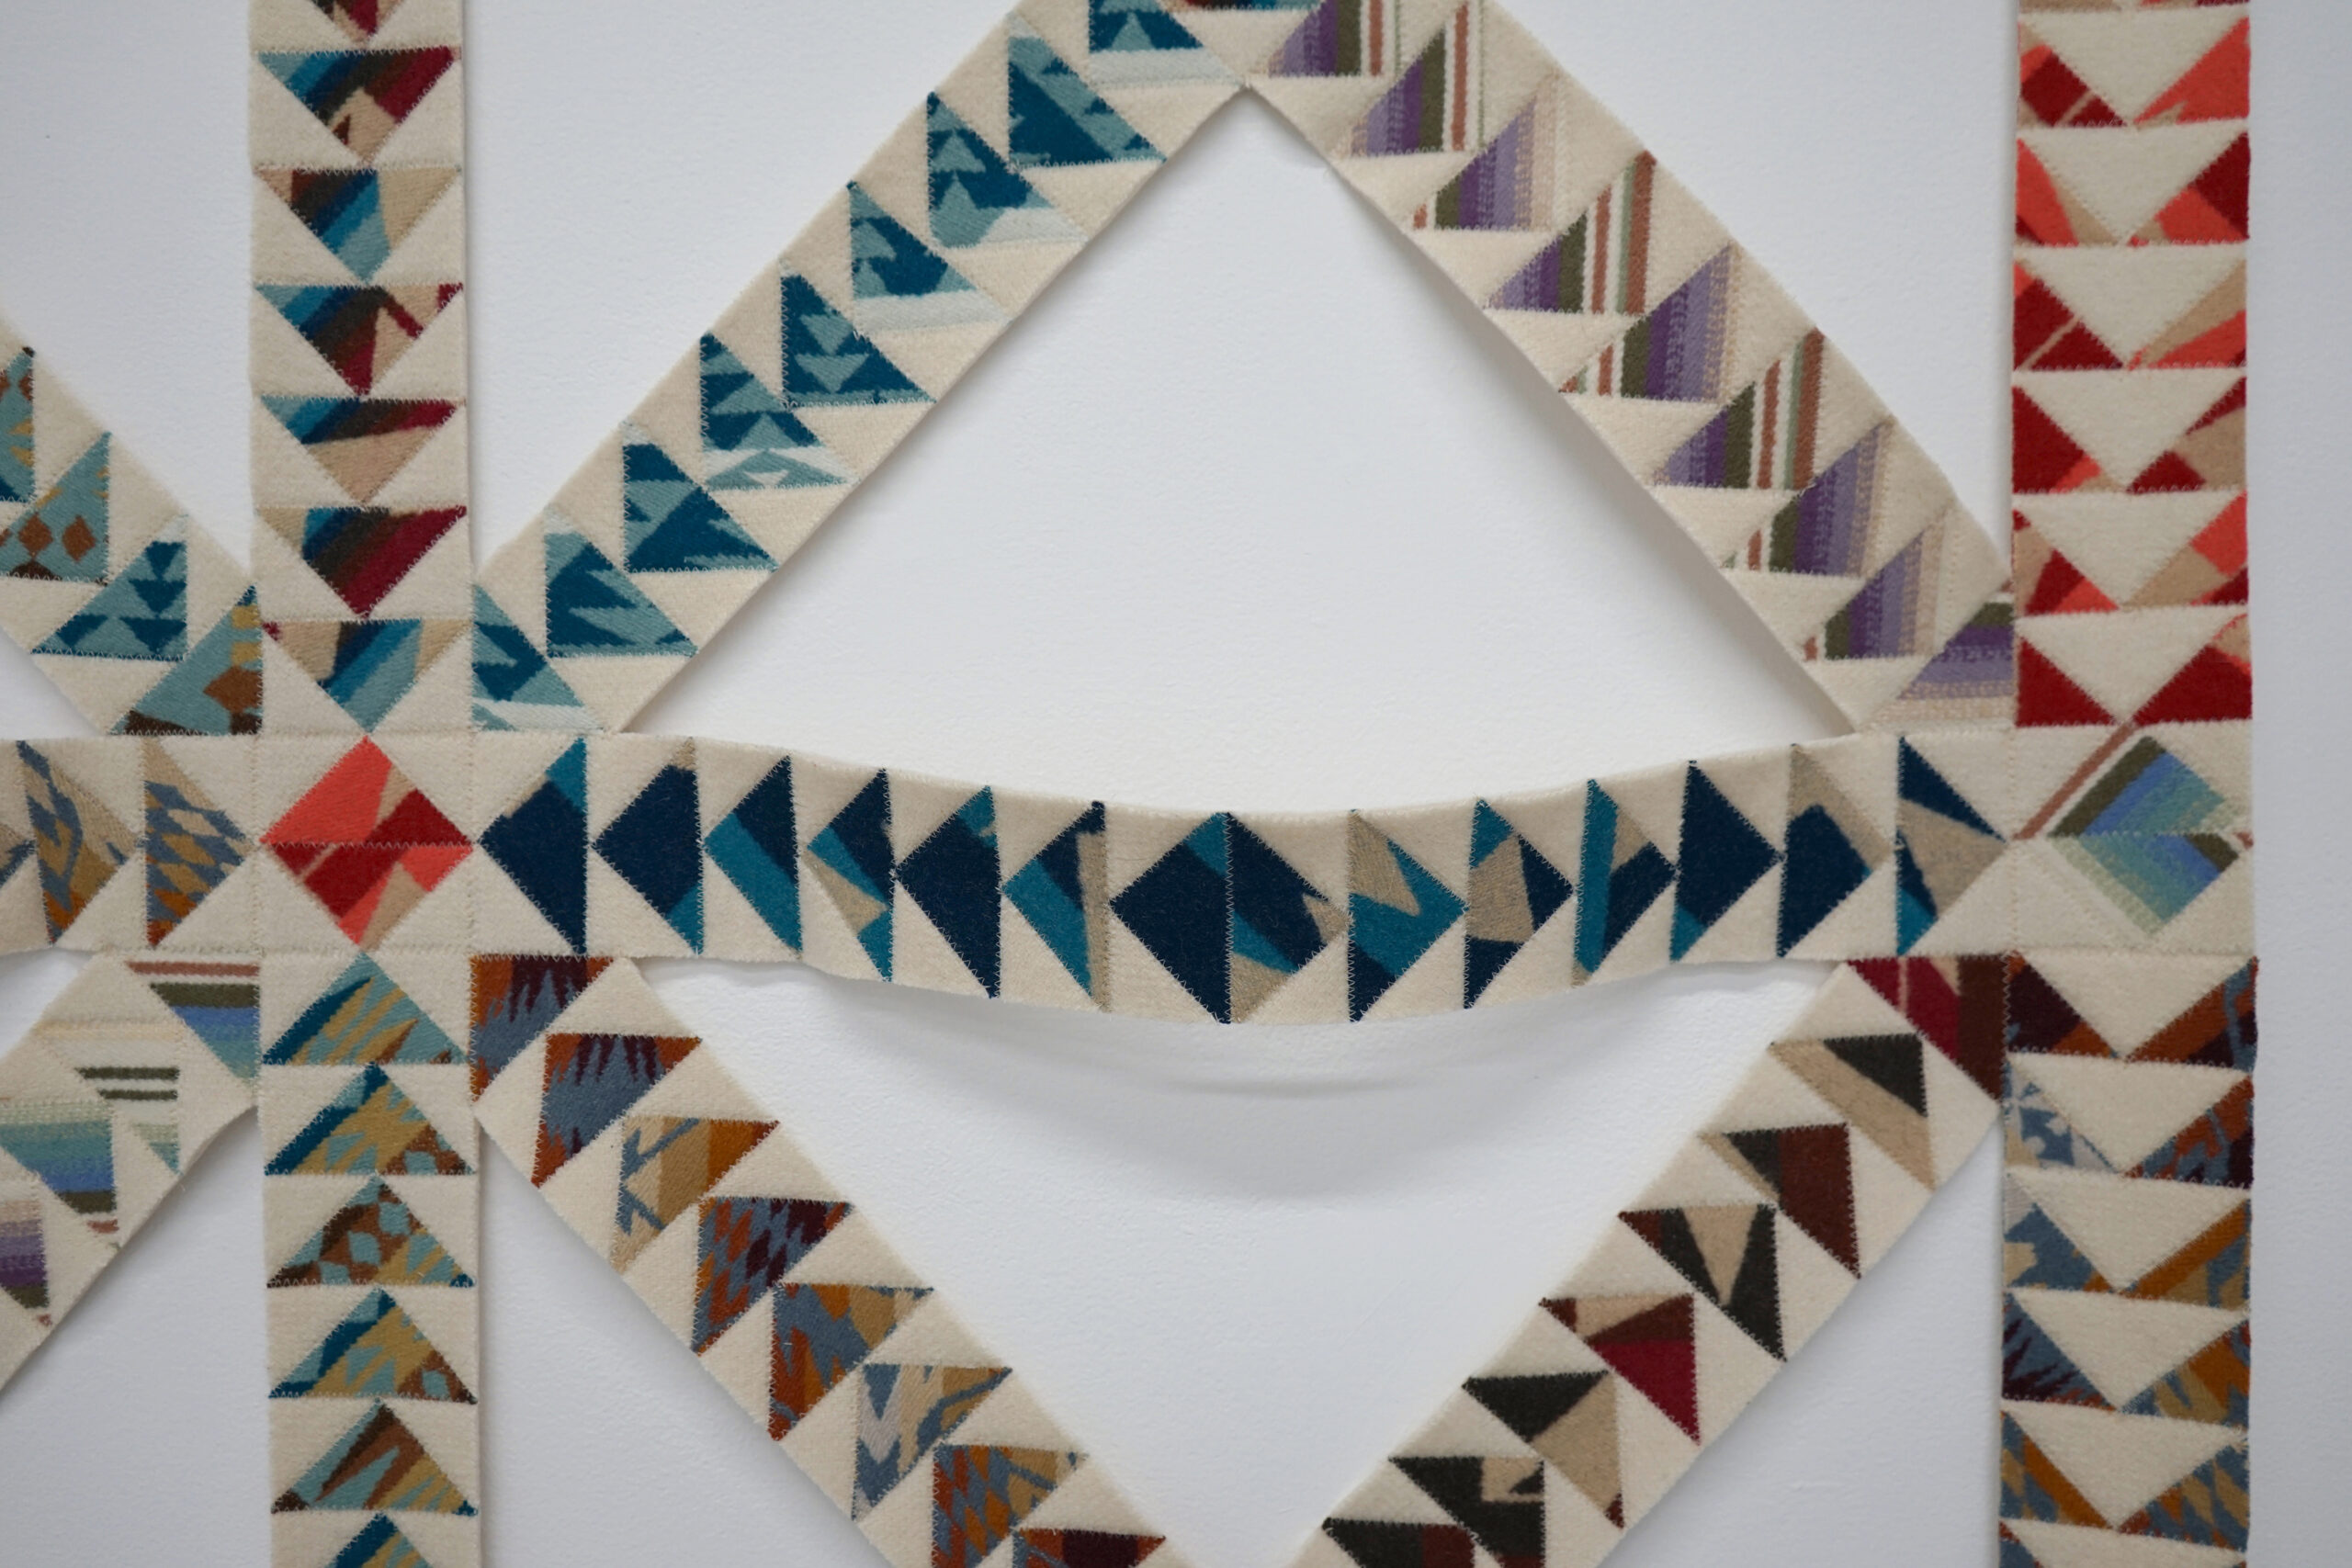 detail of multicolored pieced quilt lattice in white borders